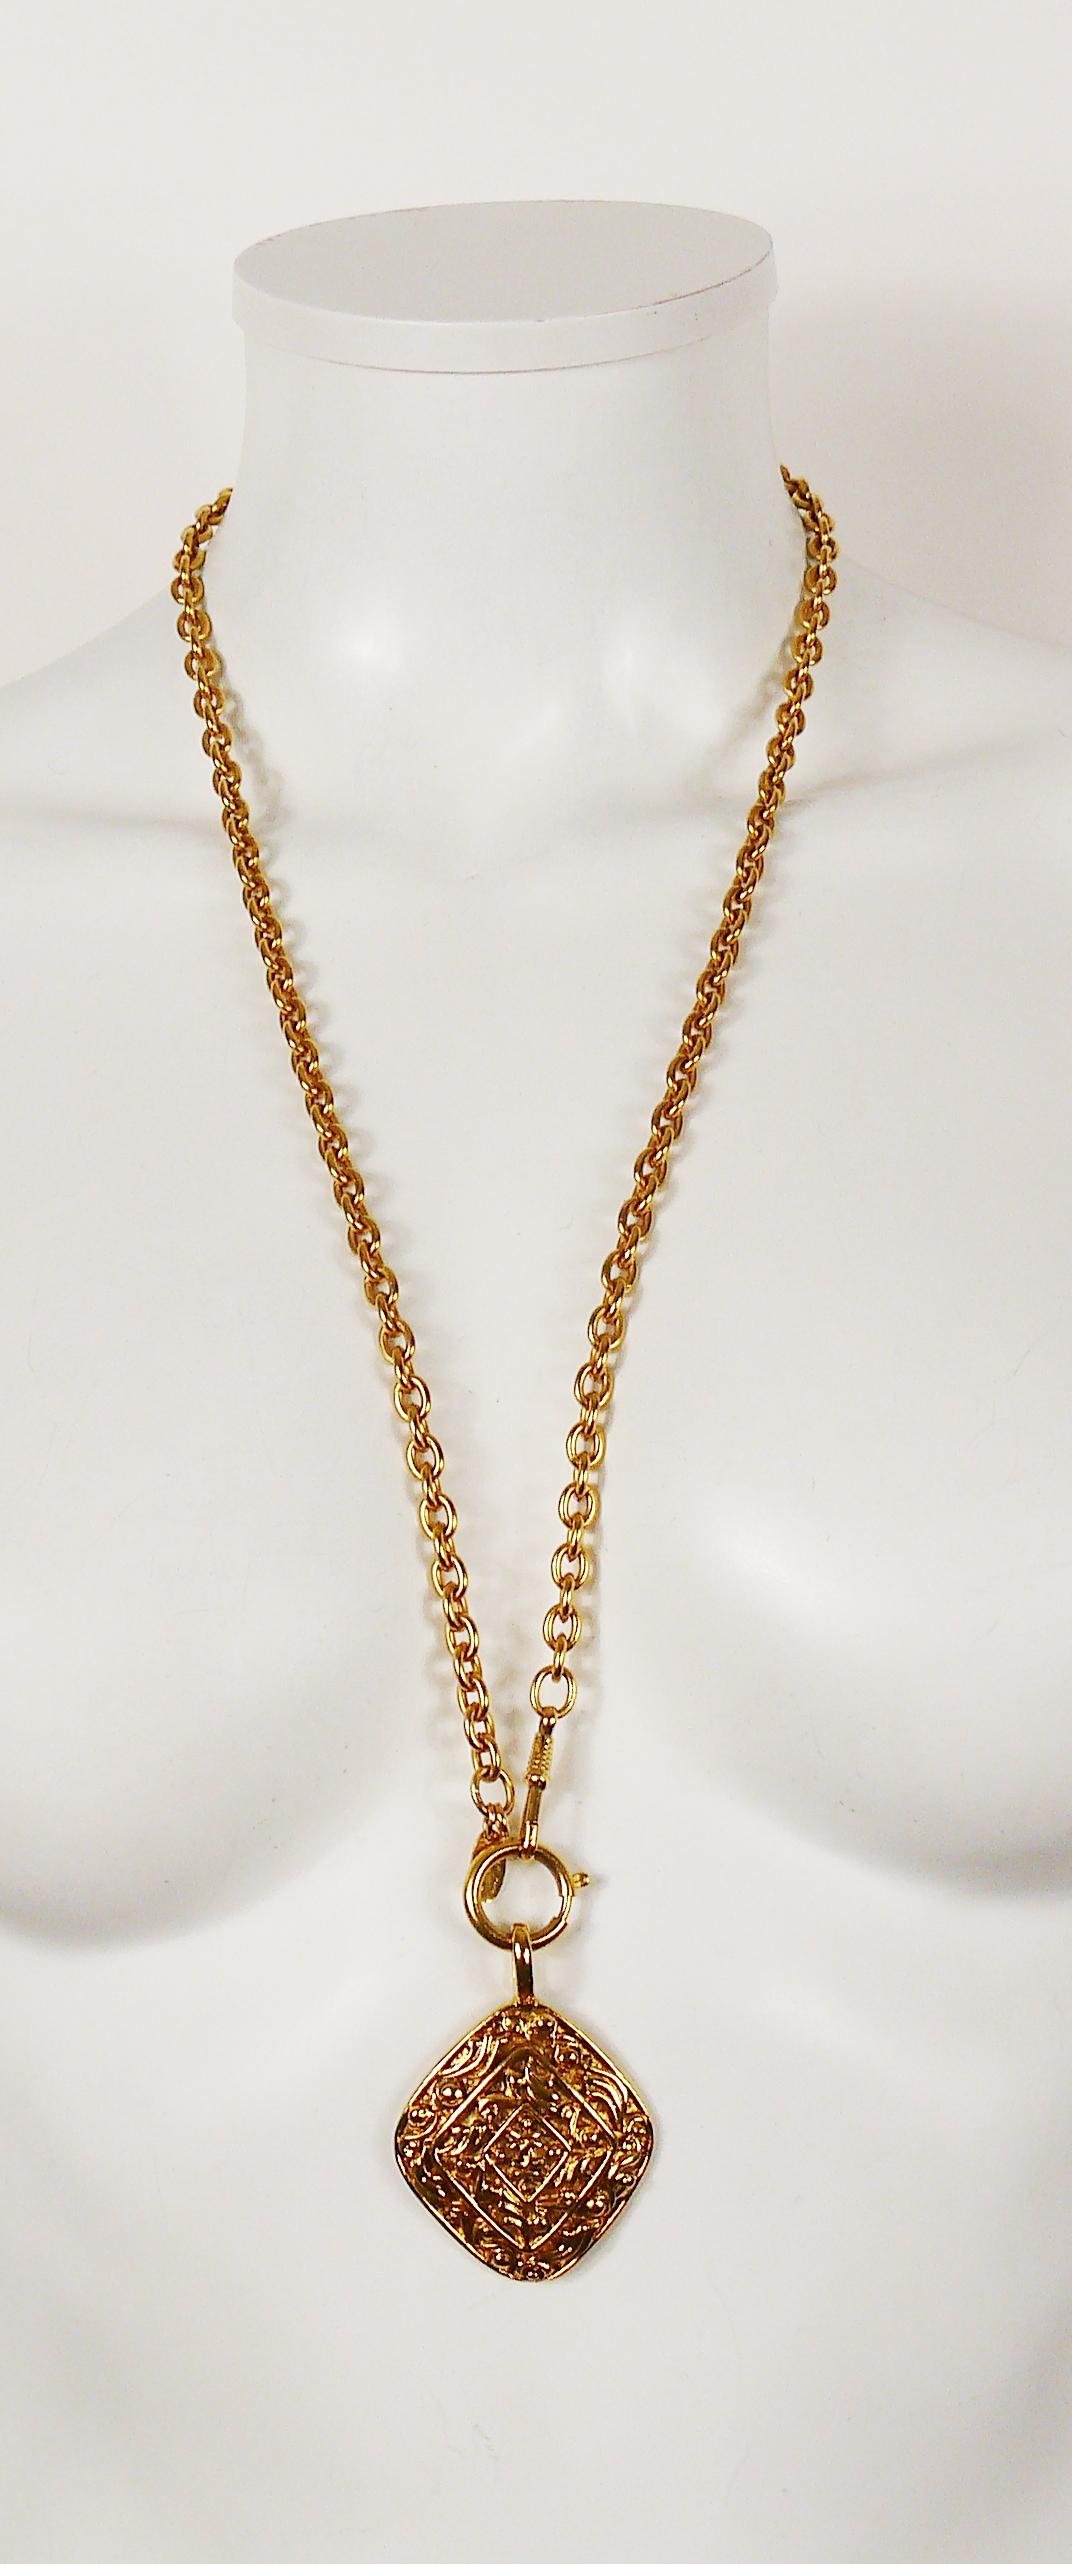 CHANEL vintage gold toned chain necklace featuring a diamond shaped textured CC pendant.

Embossed CHANEL Made in France.
Private sale S engraved on the revese of the pendant (invisible when worn).

Indicative measurements : chain length approx.